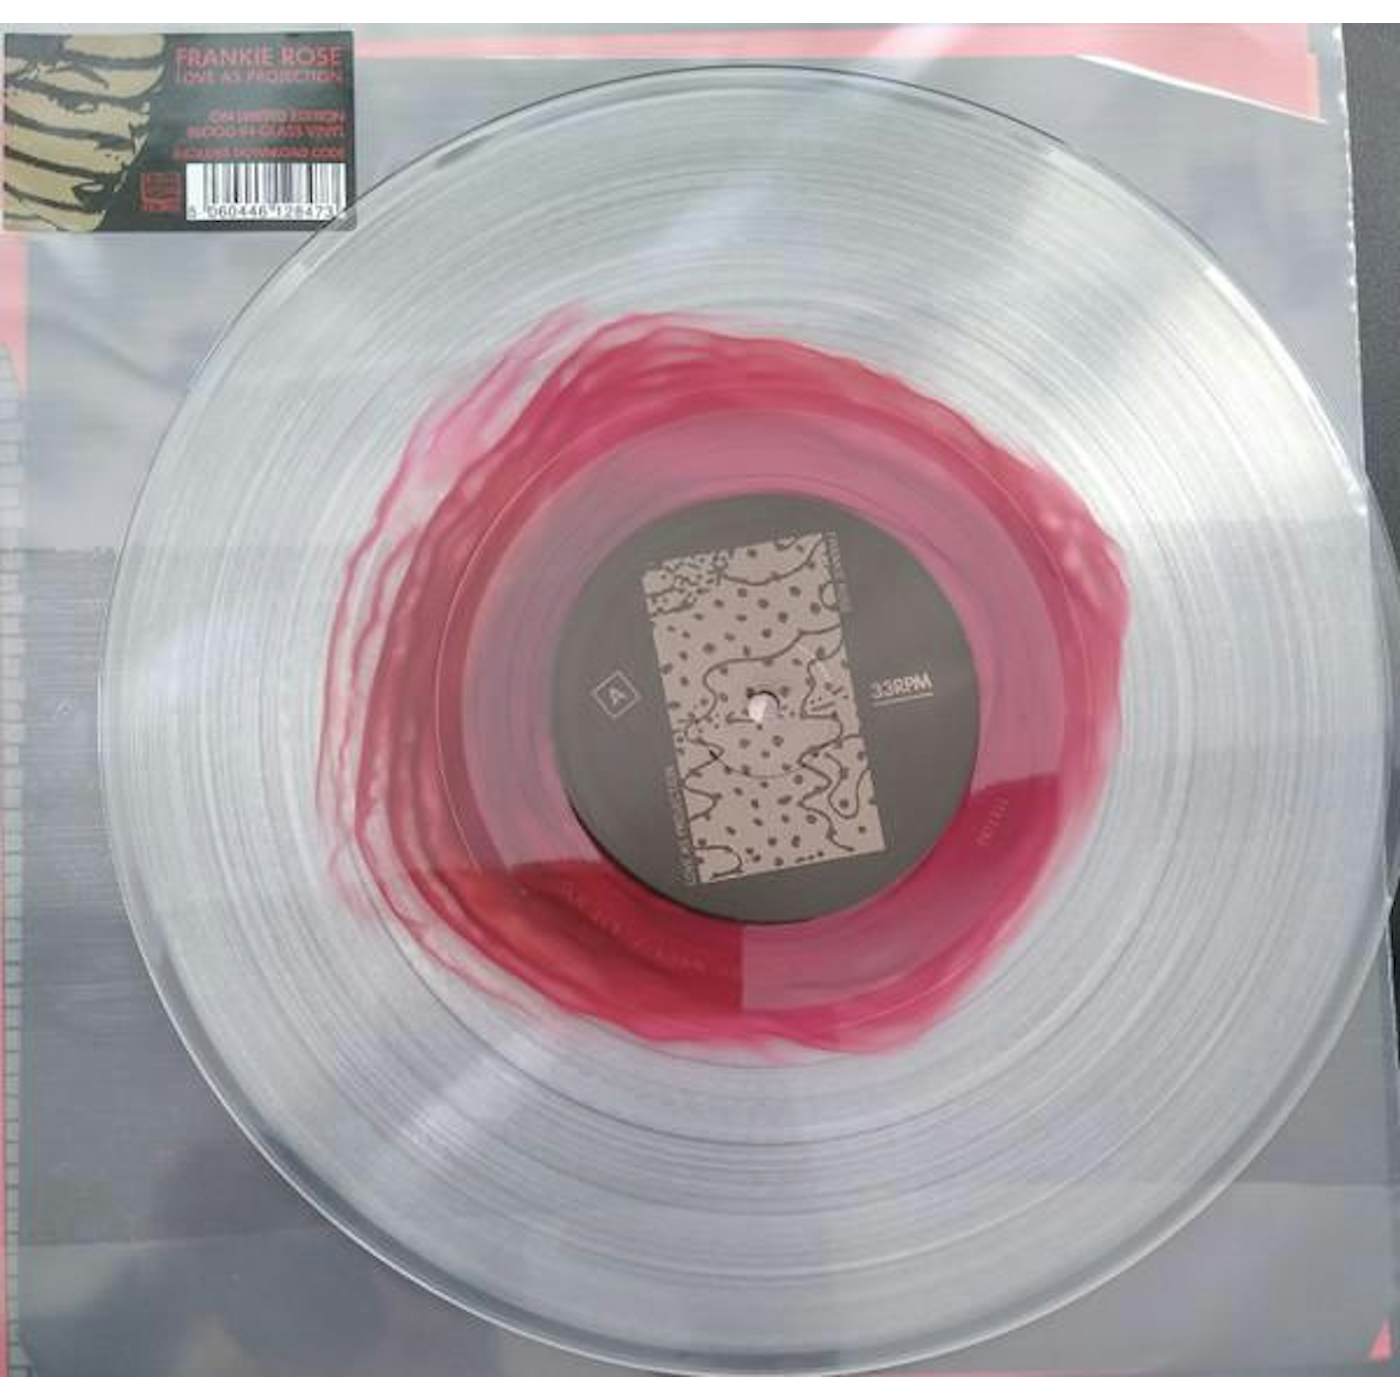 Frankie Rose LOVE AS PROJECTION Vinyl Record